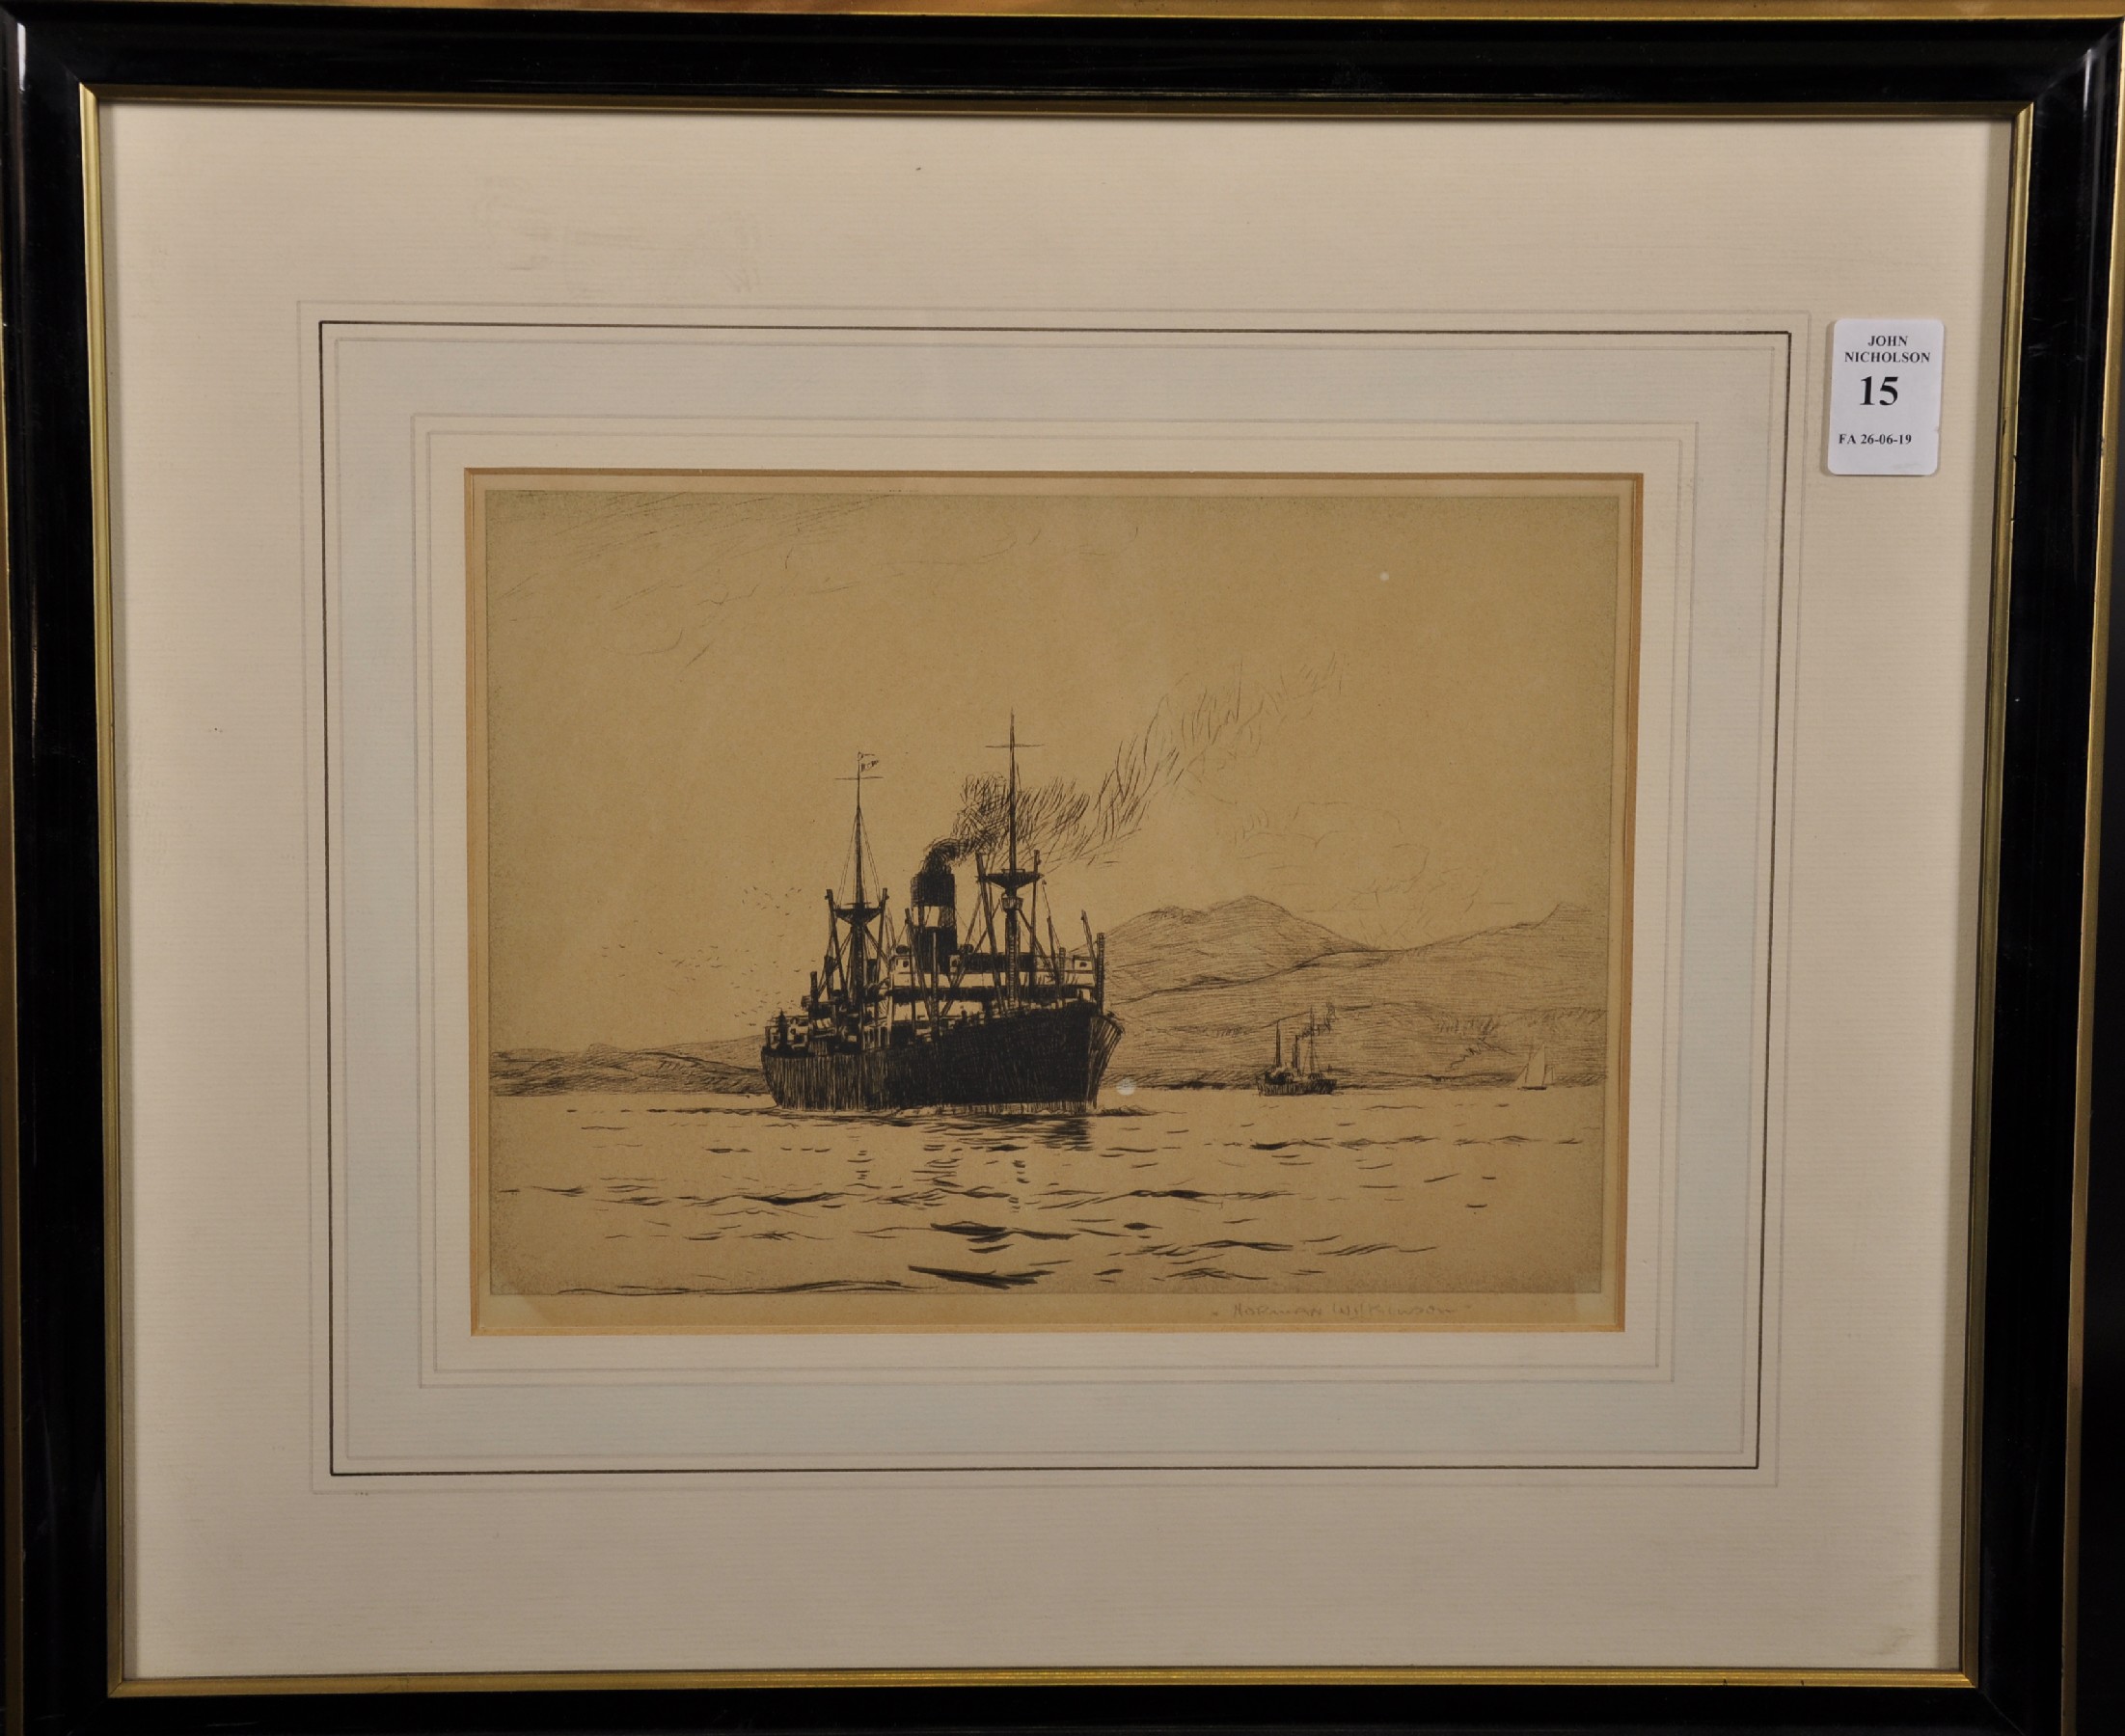 Norman Wilkinson (1878-1971) British. A Shipping Scene, Etching, Signed in Pencil, 6.5" x 9". - Image 2 of 4